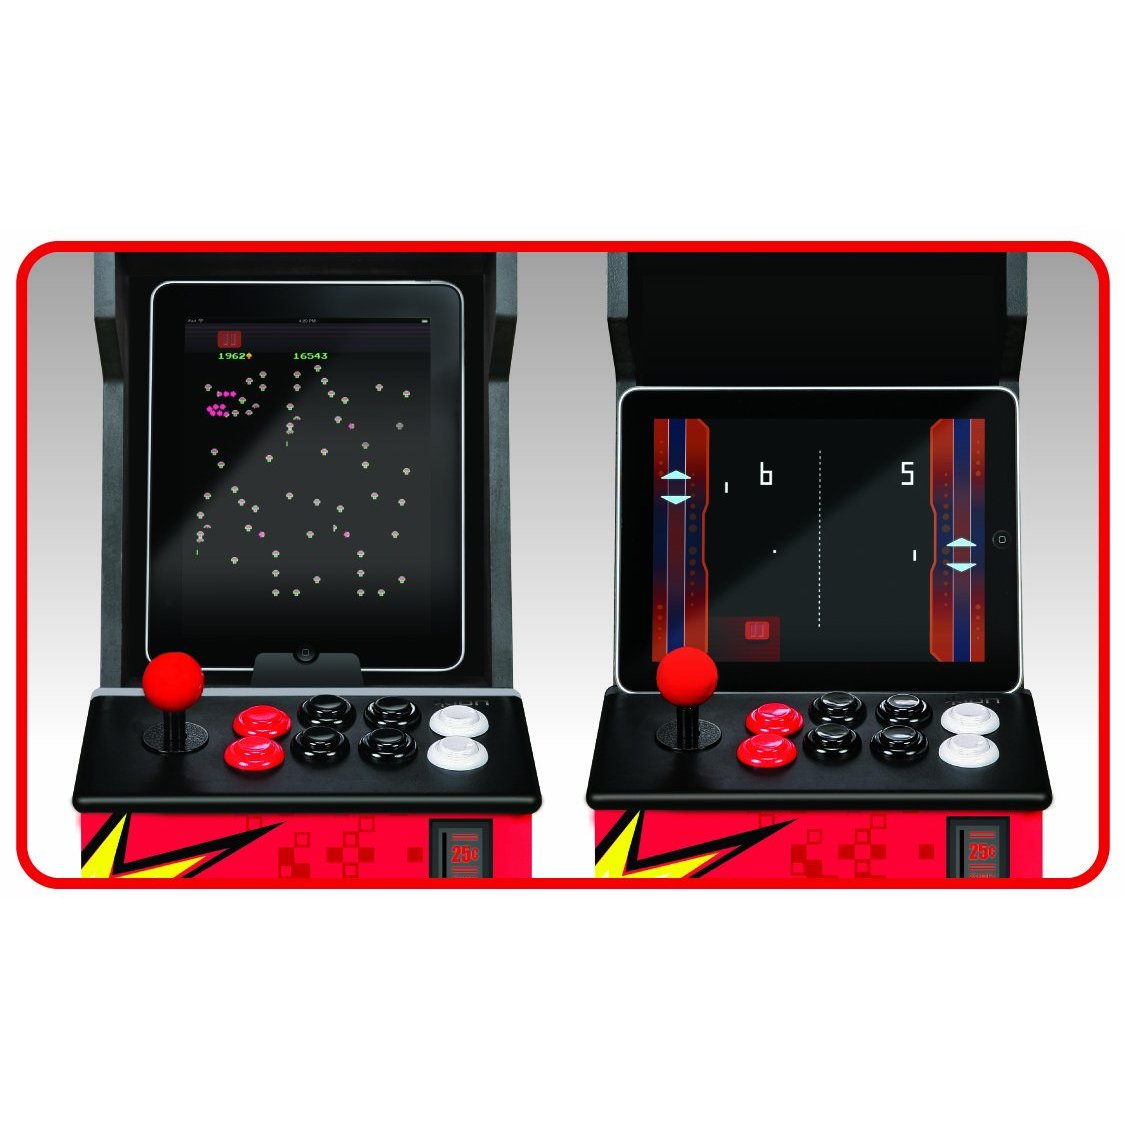 http://thetechjournal.com/wp-content/uploads/images/1201/1326110195-ion-icade-arcade-cabinet-for-ipad-3.jpg